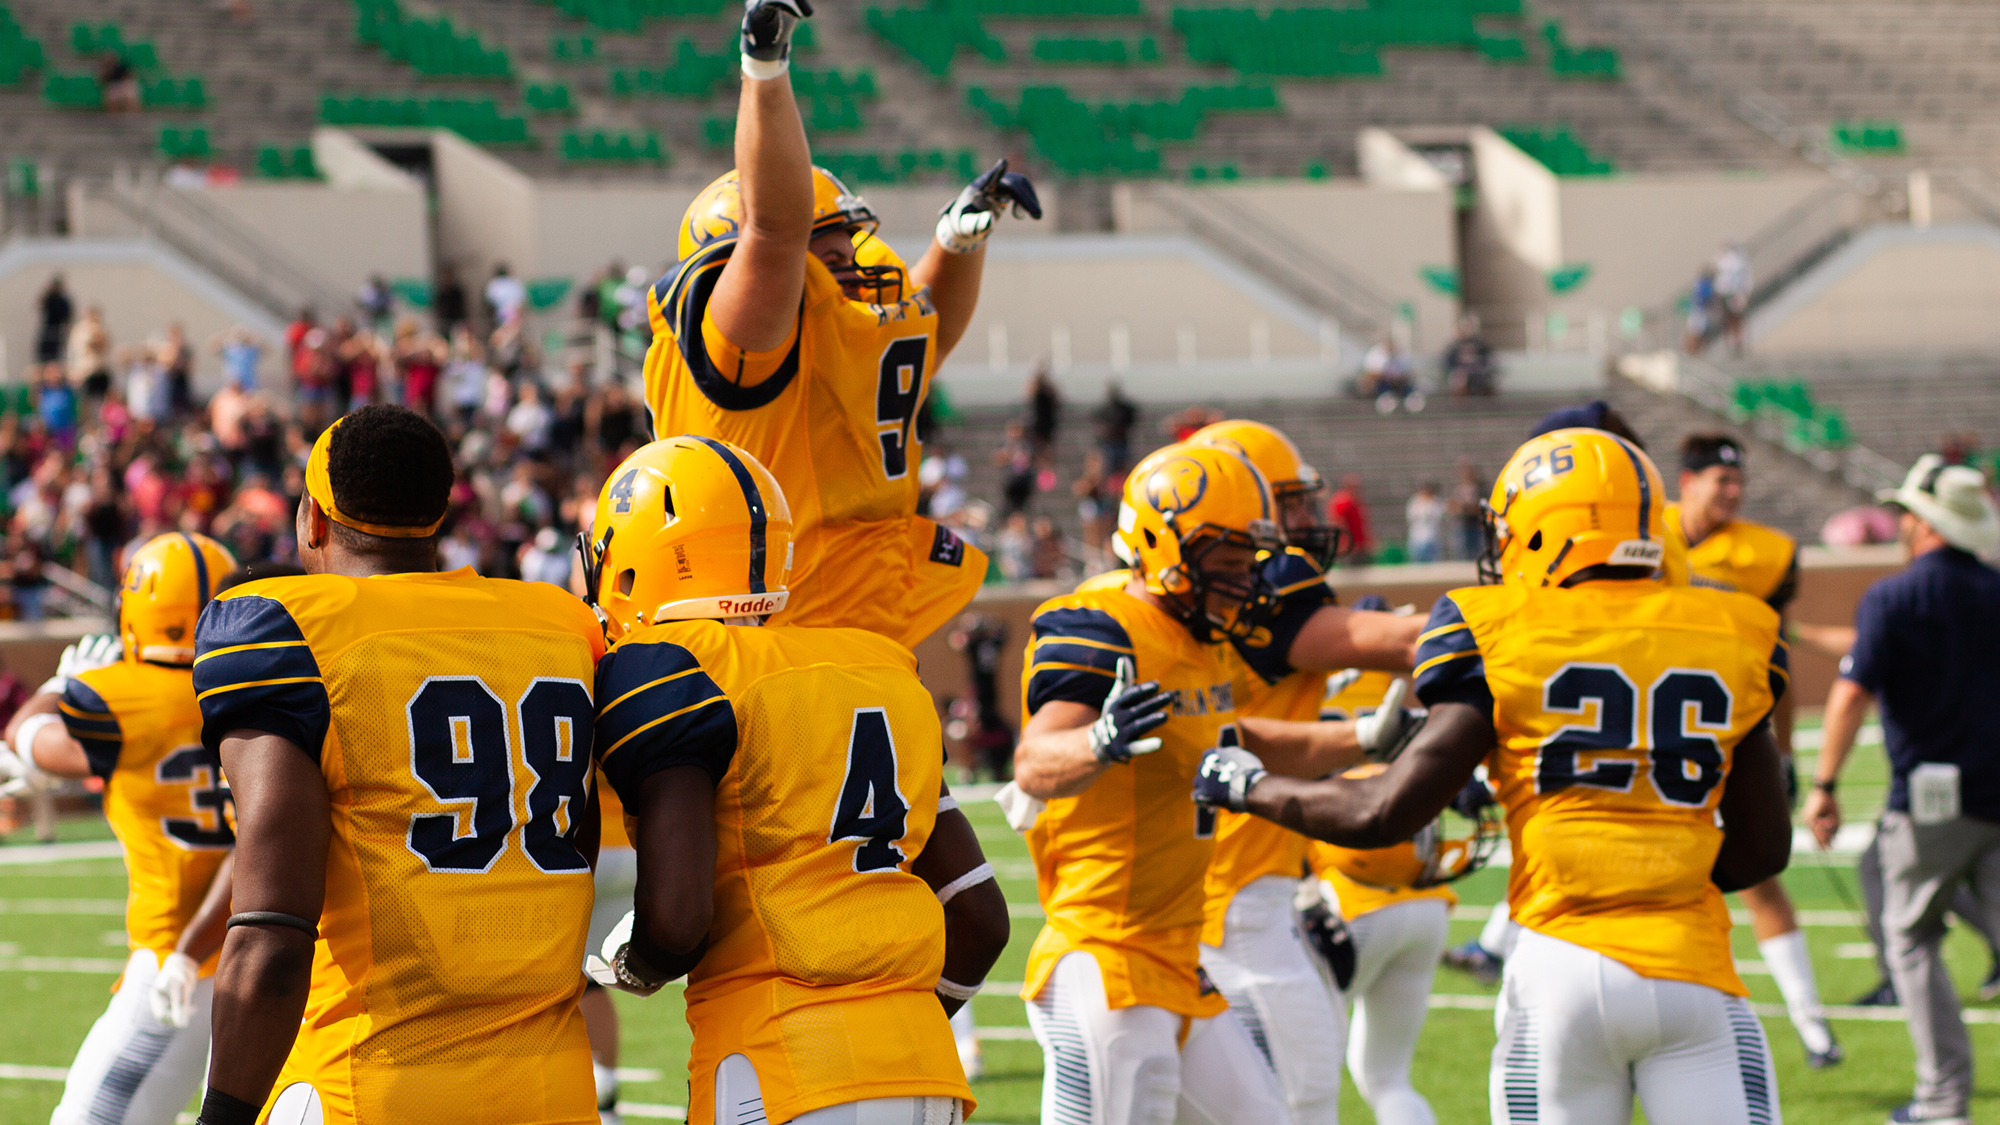 No. 9 Texas A&M Commerce Lions Football Team pulls out epic 20-19 victory over No. 4 MSU Texas in Sunday Special